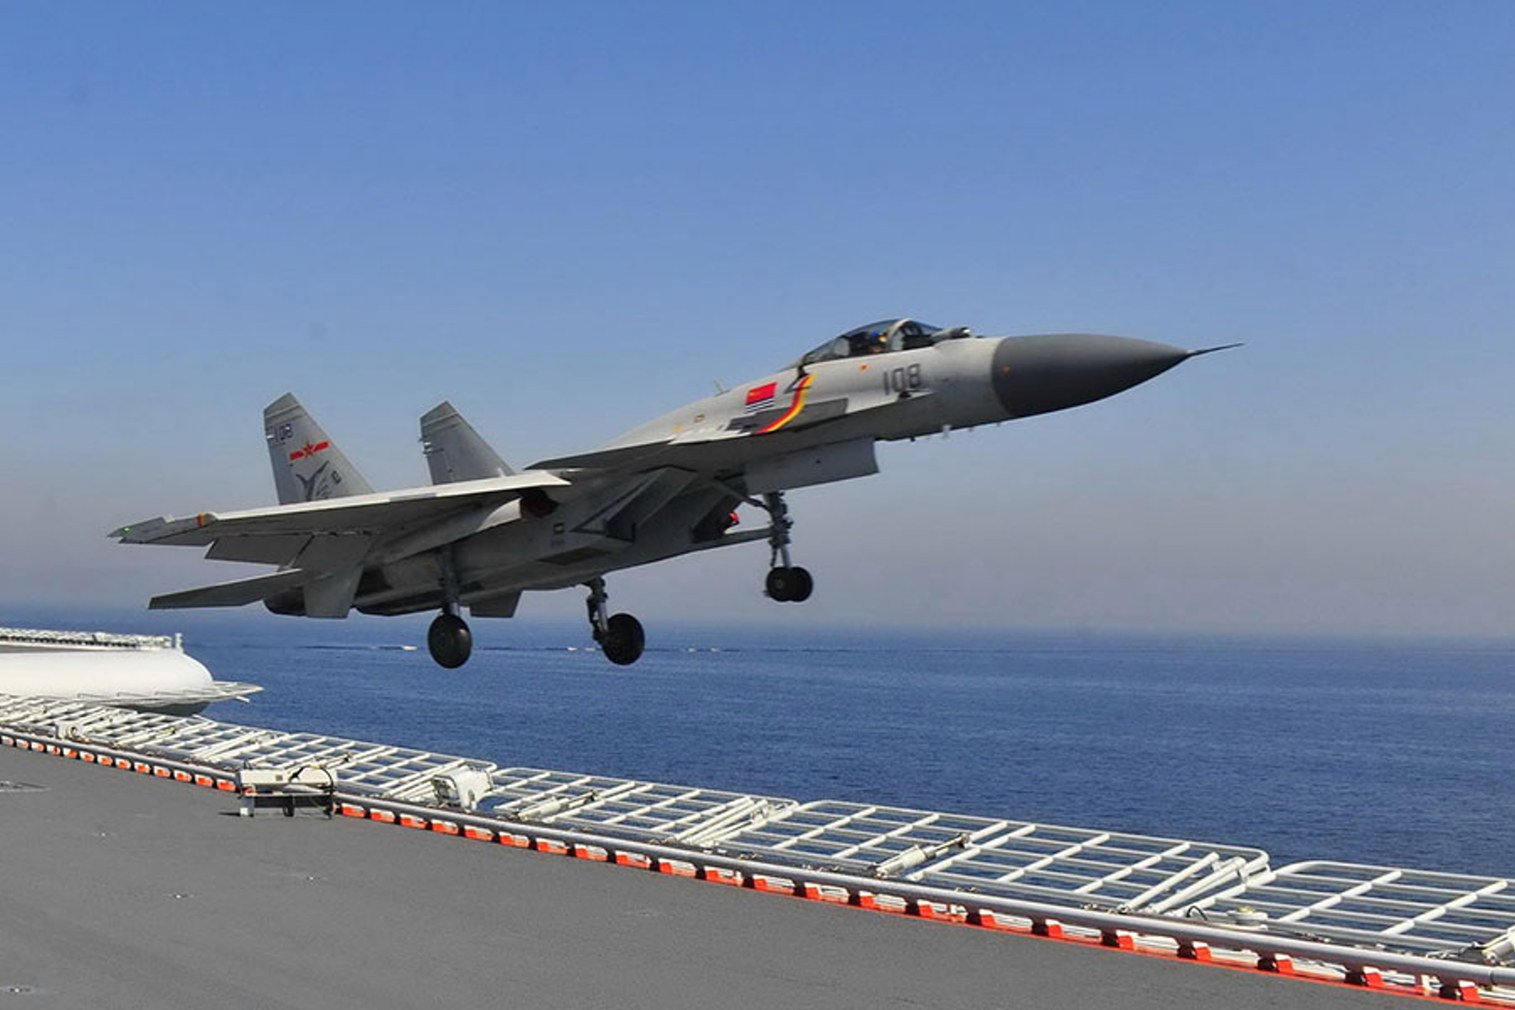 Chris Cavas on Twitter: &quot;Feature article on the Shenyang J-15 Flying Shark #fighter, a mainstay of the #Chinese #carrier LIAONING's air group. Aside from being a heavy aircraft - nearly 2 tons